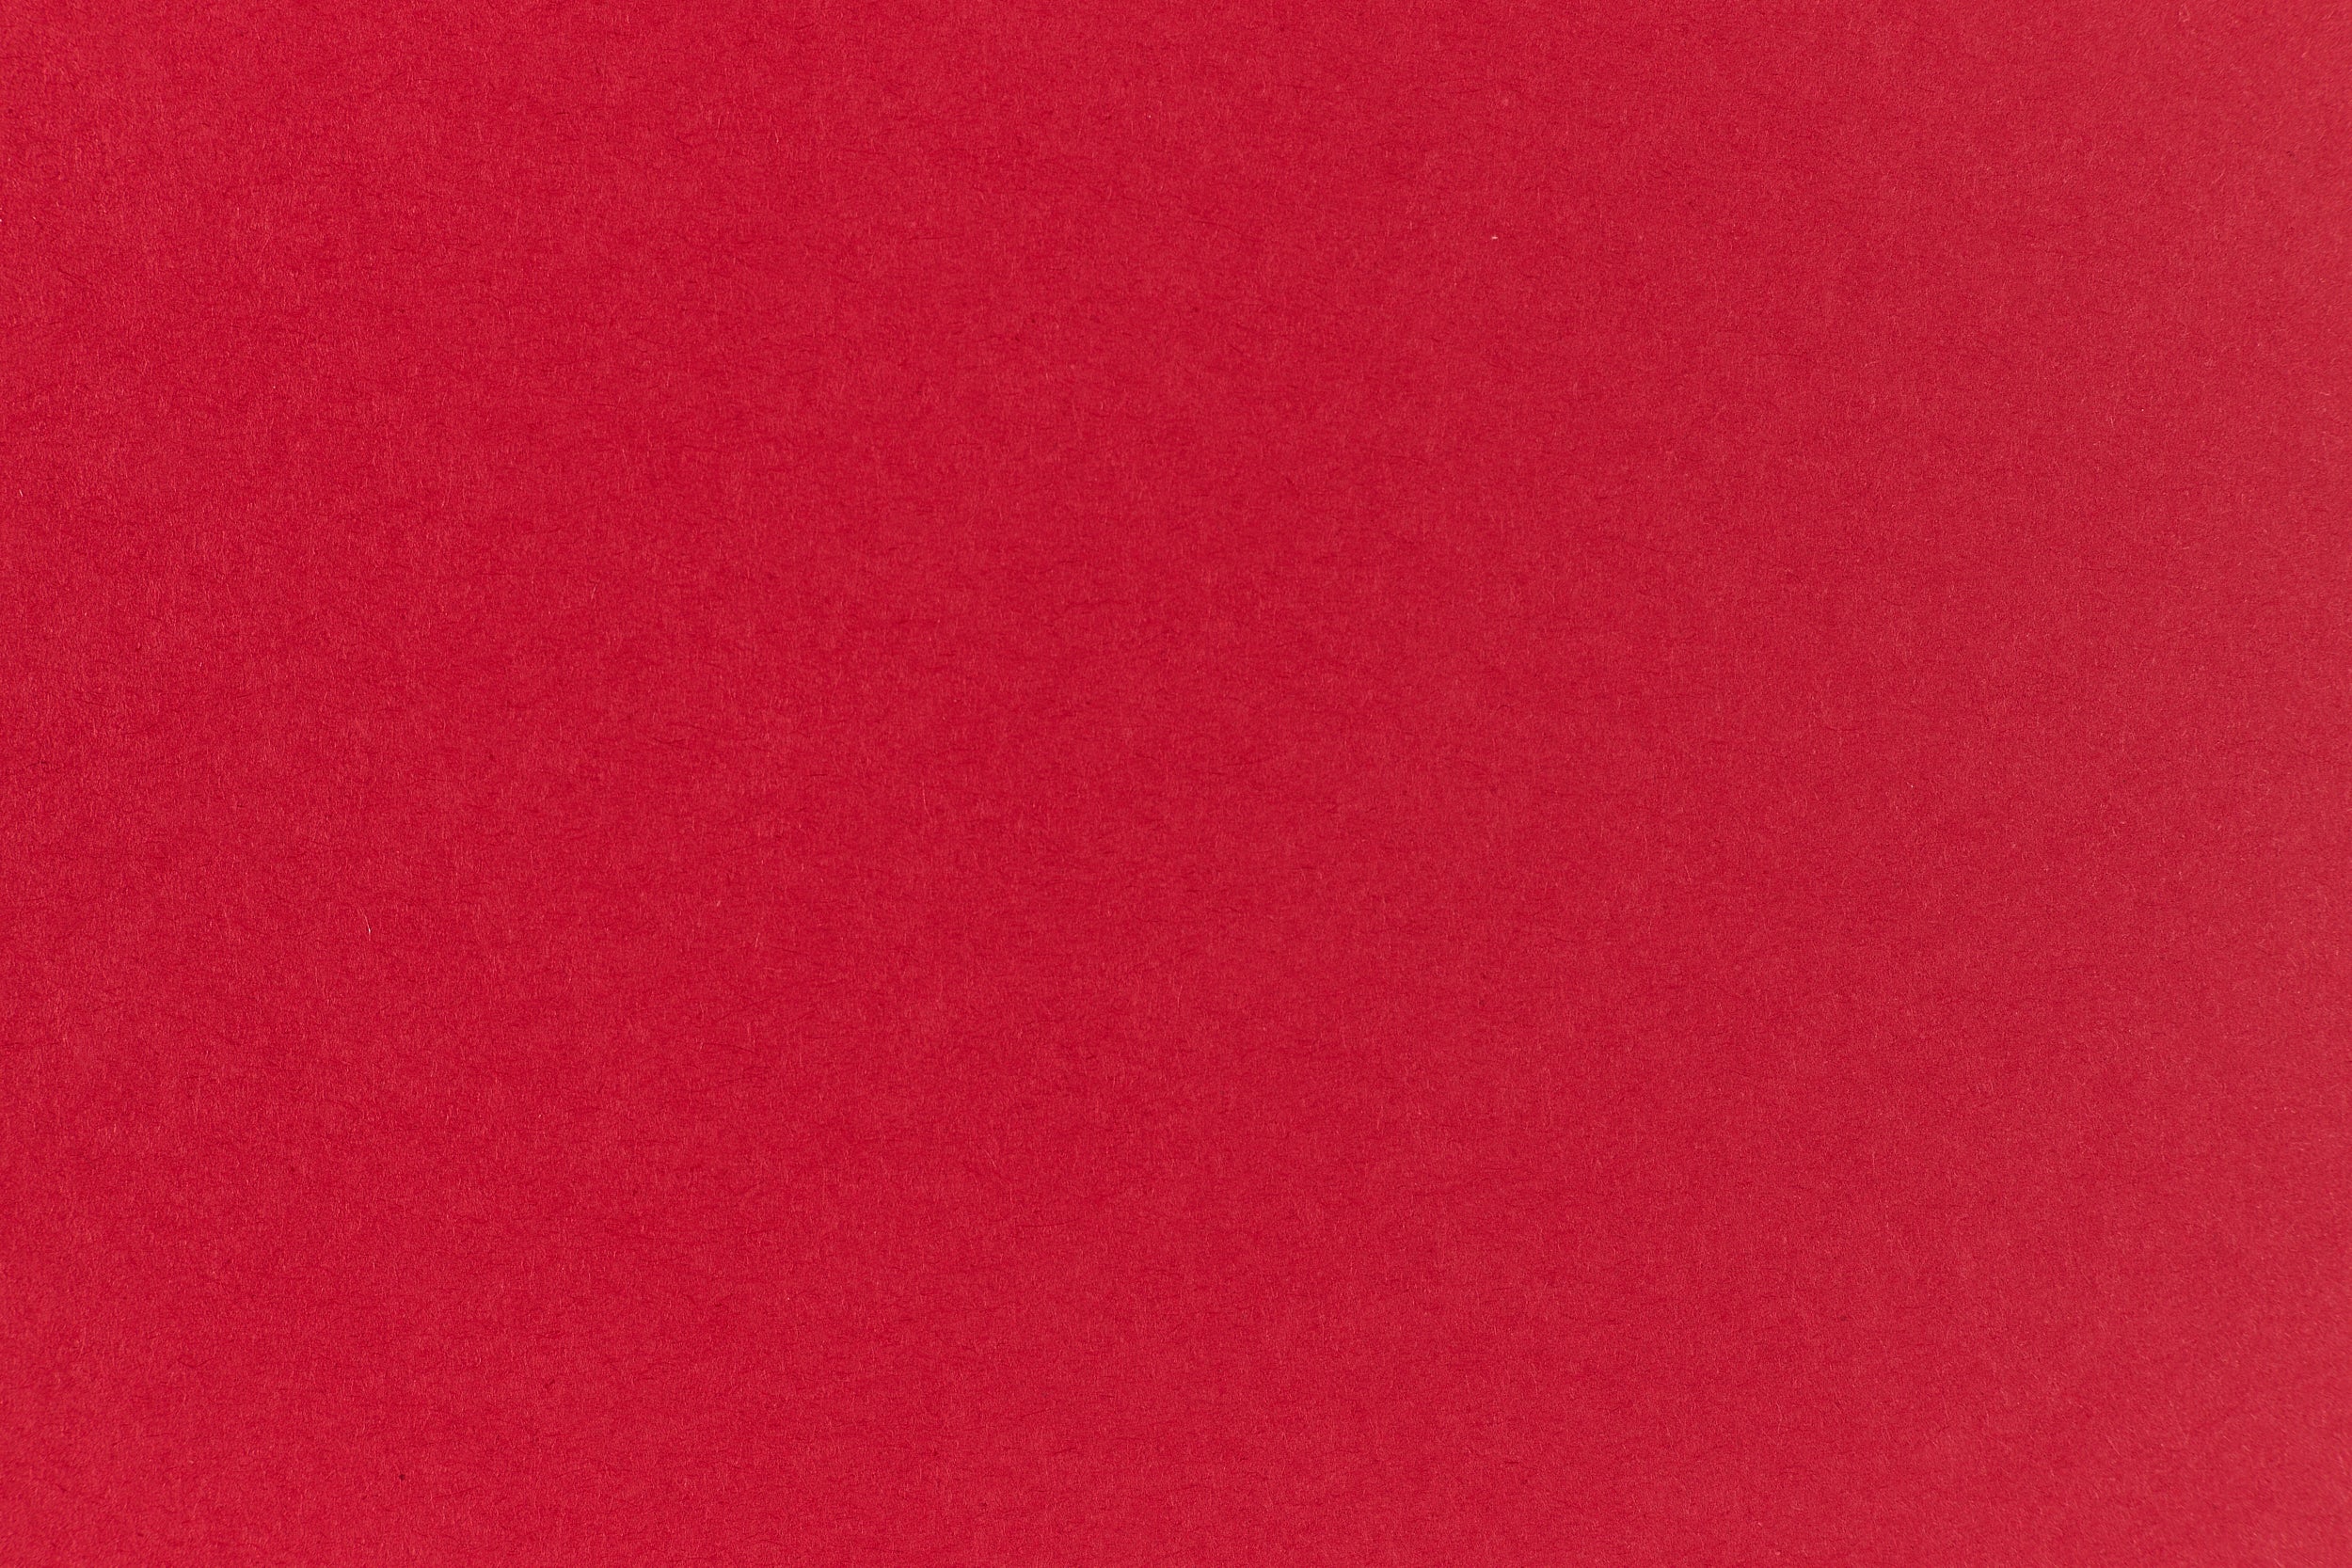  Cherry Red Cardstock - 8.5 x 11 inch - 65Lb Cover